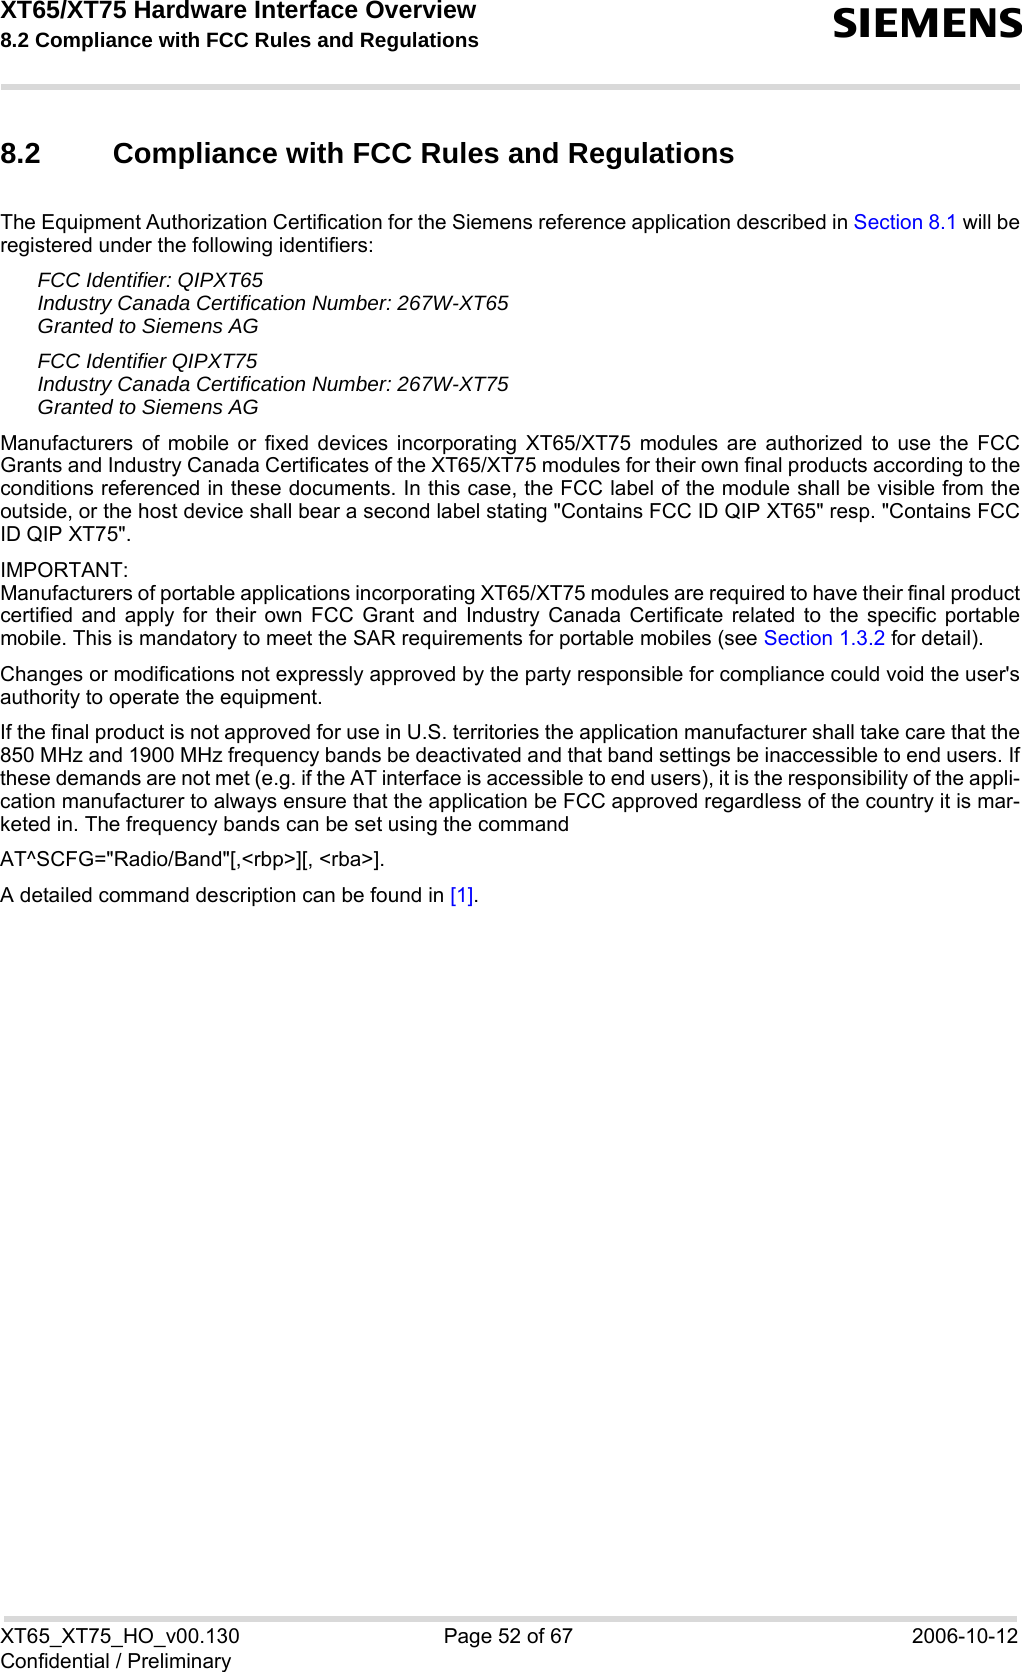 XT65/XT75 Hardware Interface Overview 8.2 Compliance with FCC Rules and Regulations sXT65_XT75_HO_v00.130 Page 52 of 67 2006-10-12Confidential / Preliminary8.2 Compliance with FCC Rules and Regulations The Equipment Authorization Certification for the Siemens reference application described in Section 8.1 will beregistered under the following identifiers:FCC Identifier: QIPXT65Industry Canada Certification Number: 267W-XT65Granted to Siemens AGFCC Identifier QIPXT75Industry Canada Certification Number: 267W-XT75Granted to Siemens AG Manufacturers of mobile or fixed devices incorporating XT65/XT75 modules are authorized to use the FCCGrants and Industry Canada Certificates of the XT65/XT75 modules for their own final products according to theconditions referenced in these documents. In this case, the FCC label of the module shall be visible from theoutside, or the host device shall bear a second label stating &quot;Contains FCC ID QIP XT65&quot; resp. &quot;Contains FCCID QIP XT75&quot;.IMPORTANT:Manufacturers of portable applications incorporating XT65/XT75 modules are required to have their final productcertified and apply for their own FCC Grant and Industry Canada Certificate related to the specific portablemobile. This is mandatory to meet the SAR requirements for portable mobiles (see Section 1.3.2 for detail).Changes or modifications not expressly approved by the party responsible for compliance could void the user&apos;sauthority to operate the equipment.If the final product is not approved for use in U.S. territories the application manufacturer shall take care that the850 MHz and 1900 MHz frequency bands be deactivated and that band settings be inaccessible to end users. Ifthese demands are not met (e.g. if the AT interface is accessible to end users), it is the responsibility of the appli-cation manufacturer to always ensure that the application be FCC approved regardless of the country it is mar-keted in. The frequency bands can be set using the command AT^SCFG=&quot;Radio/Band&quot;[,&lt;rbp&gt;][, &lt;rba&gt;]. A detailed command description can be found in [1].